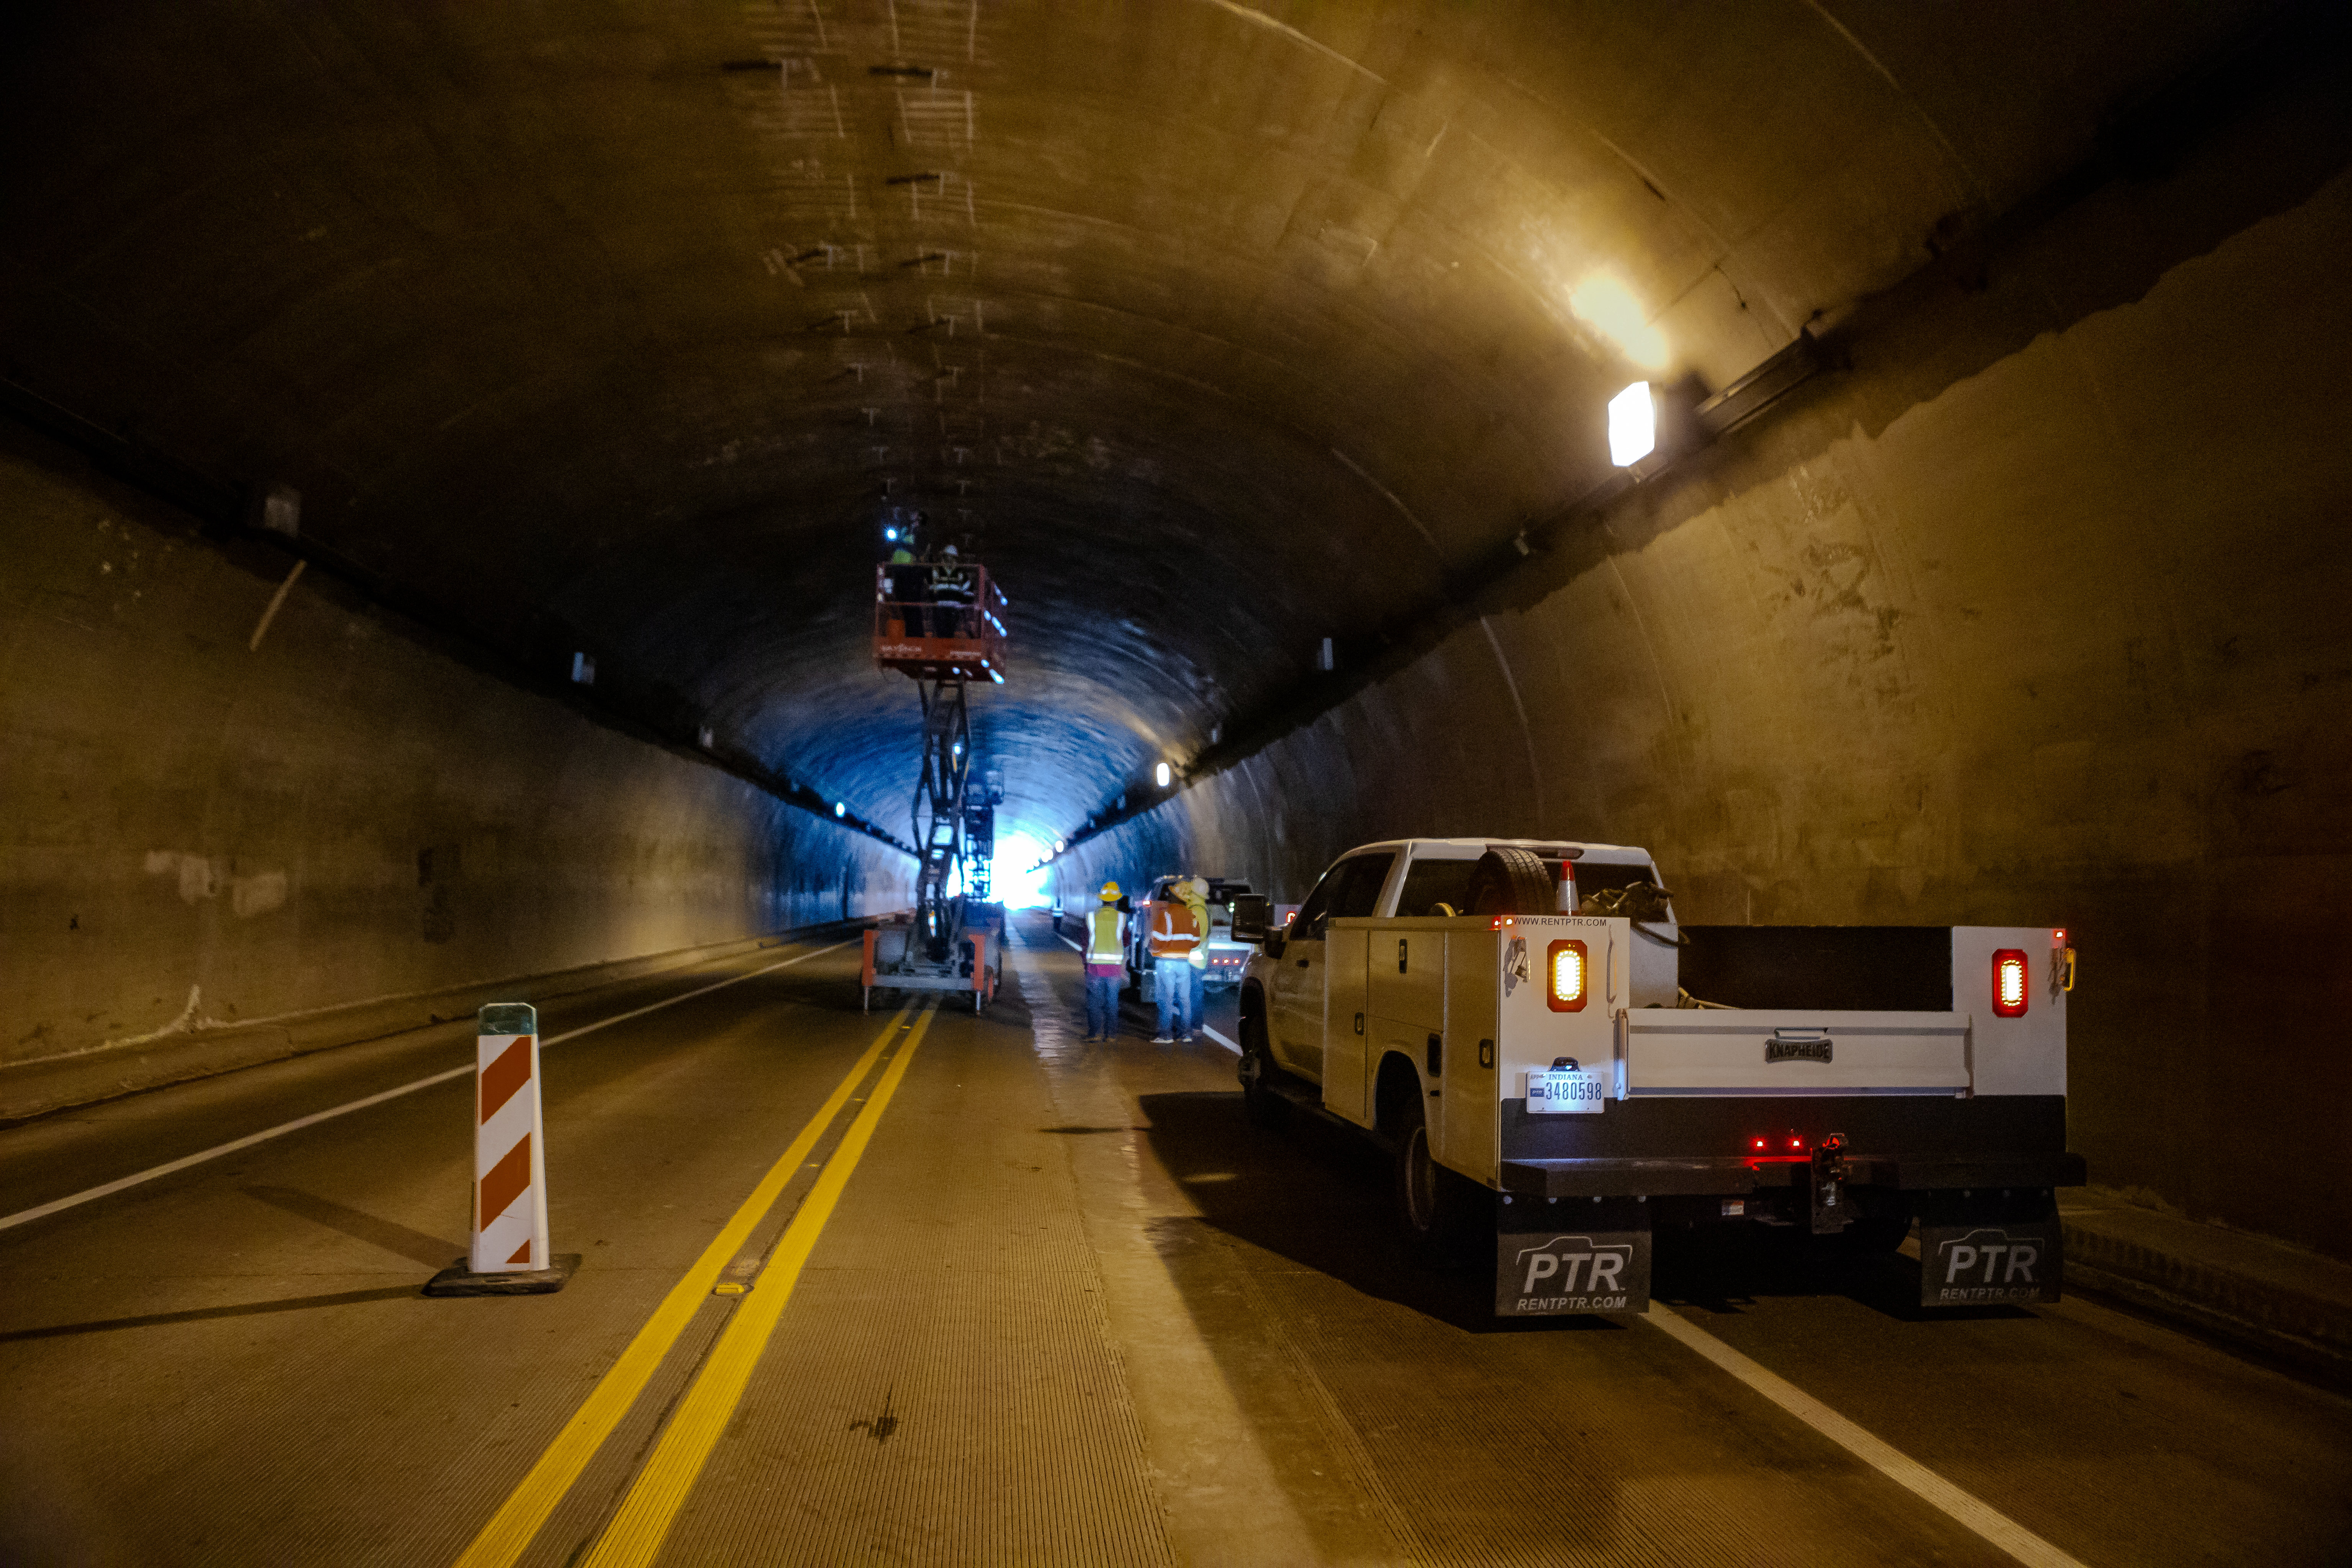 A work truck is parked inside a tunnel as construction work occurs inside the tunnel.